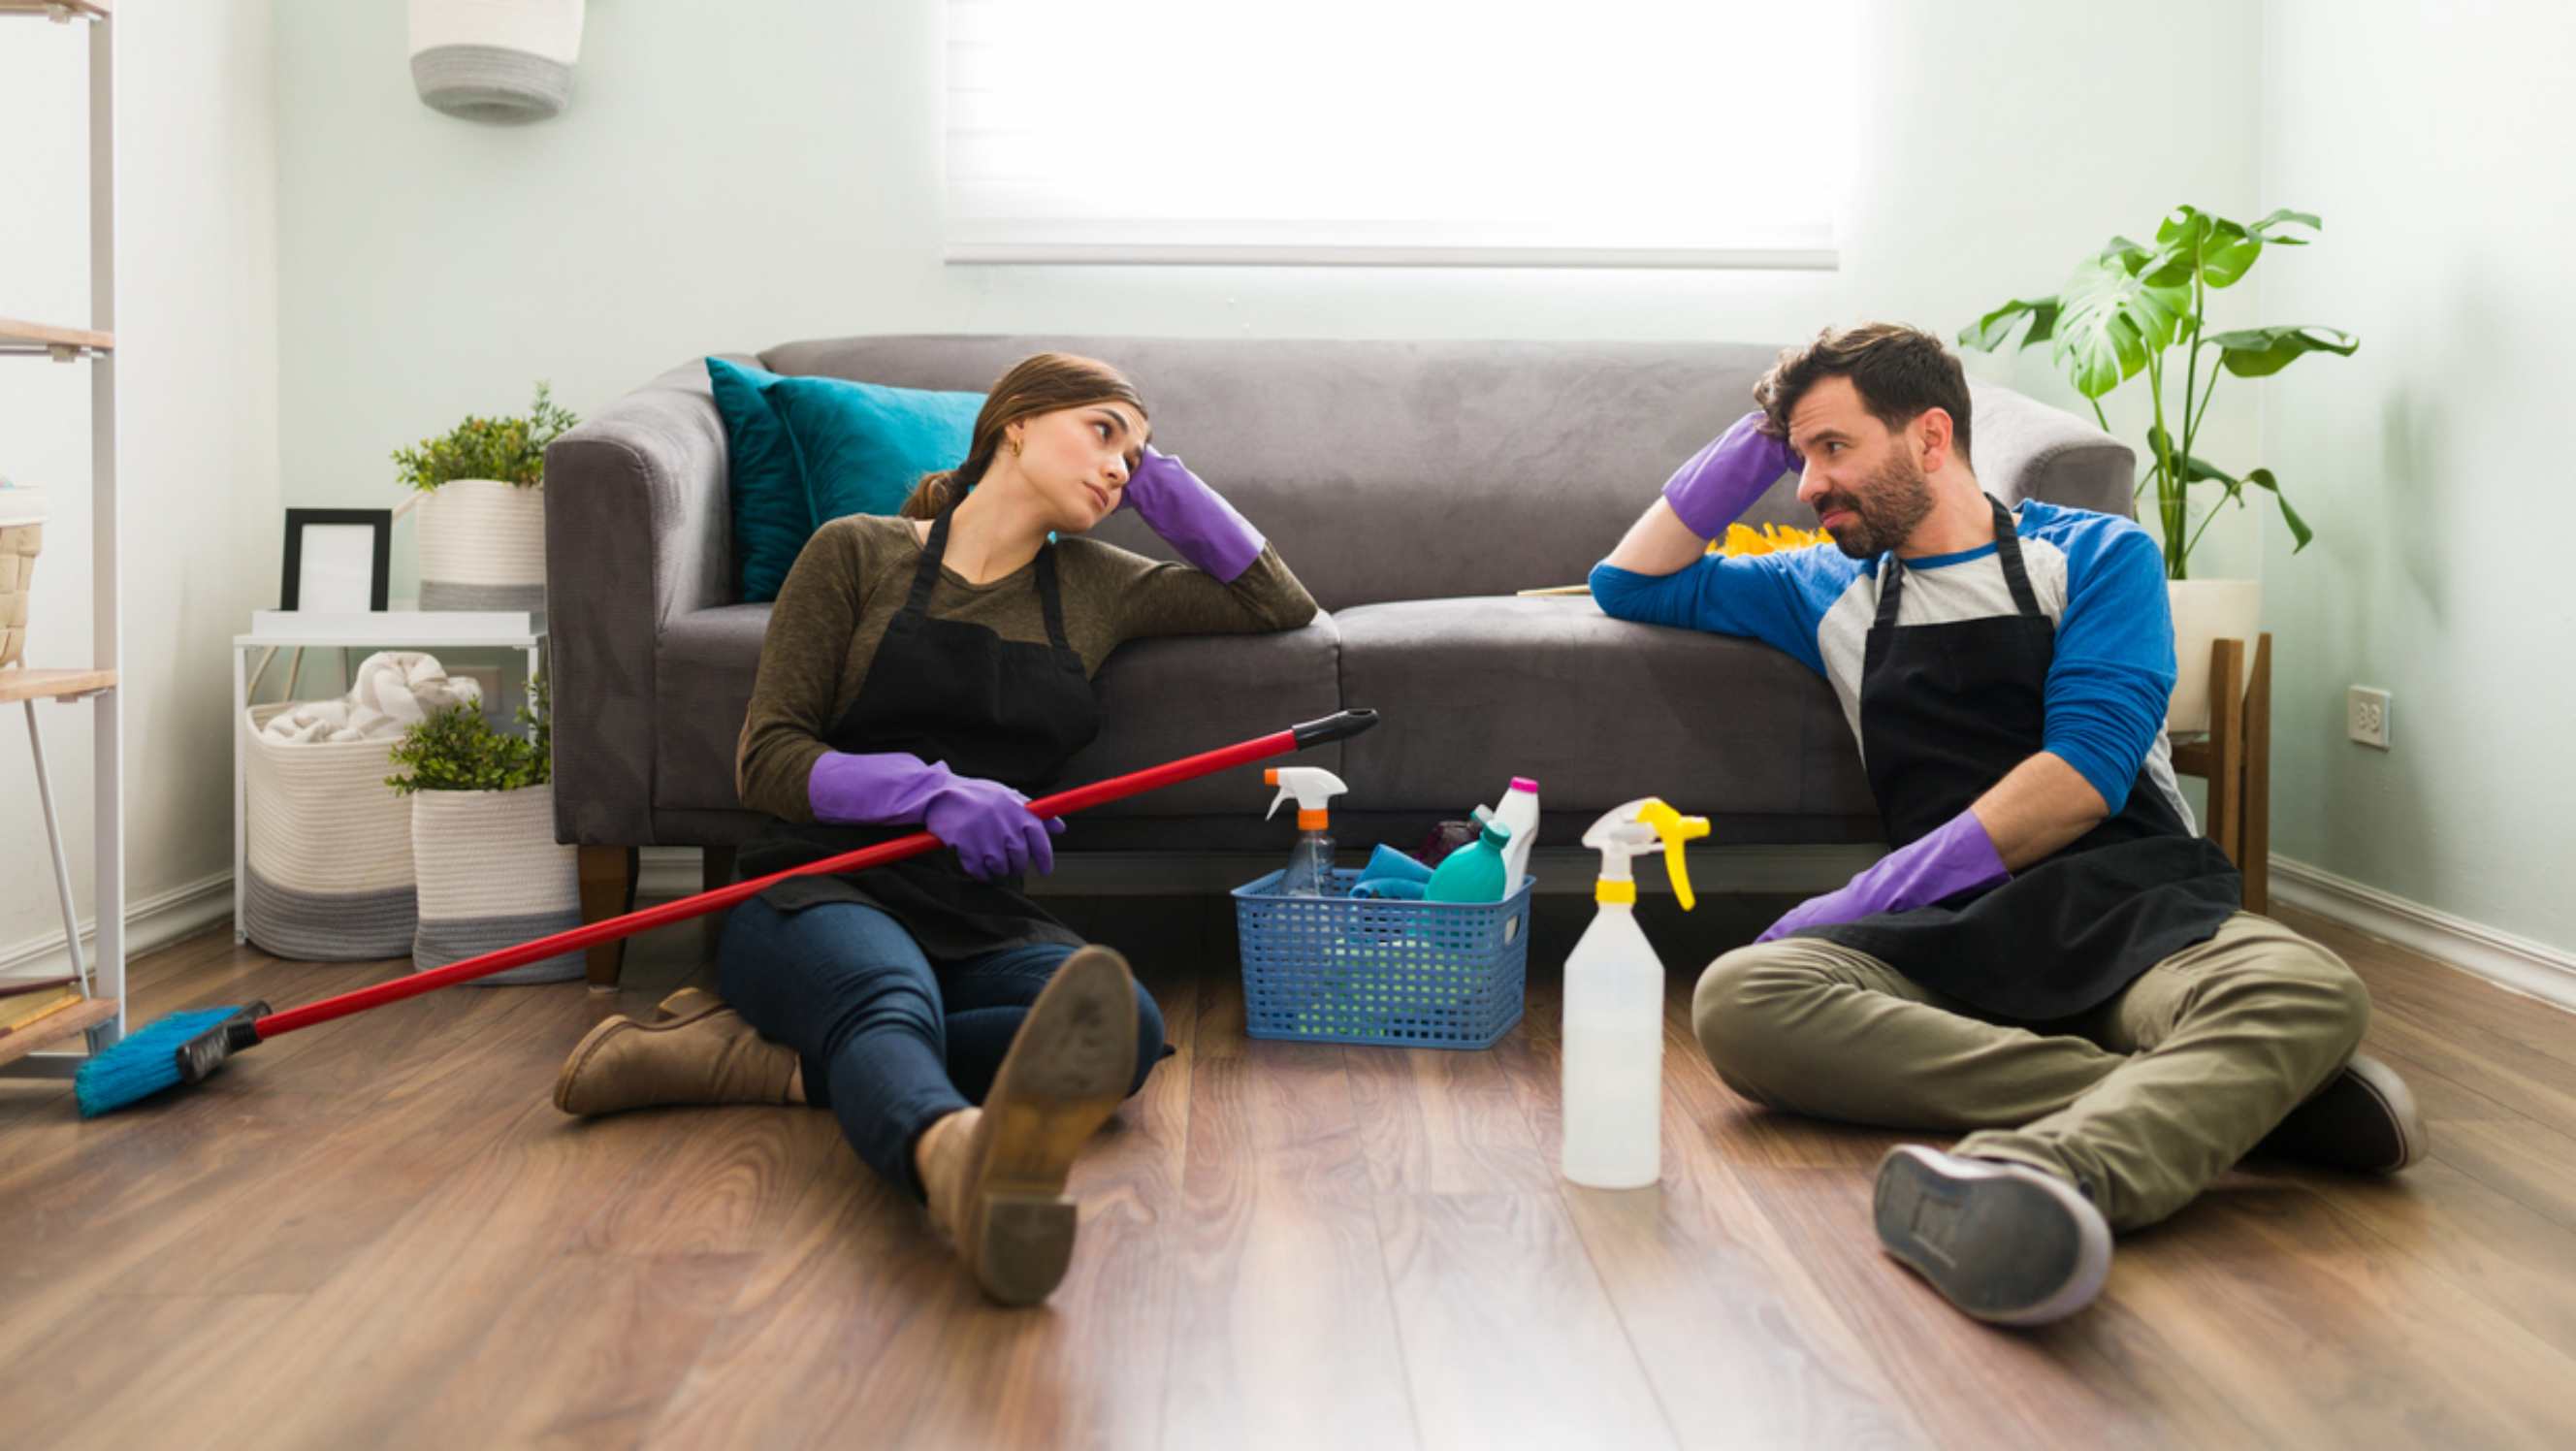 Housekeeper vs cleaner - A housekeeper and a cleaner sitting on the floor